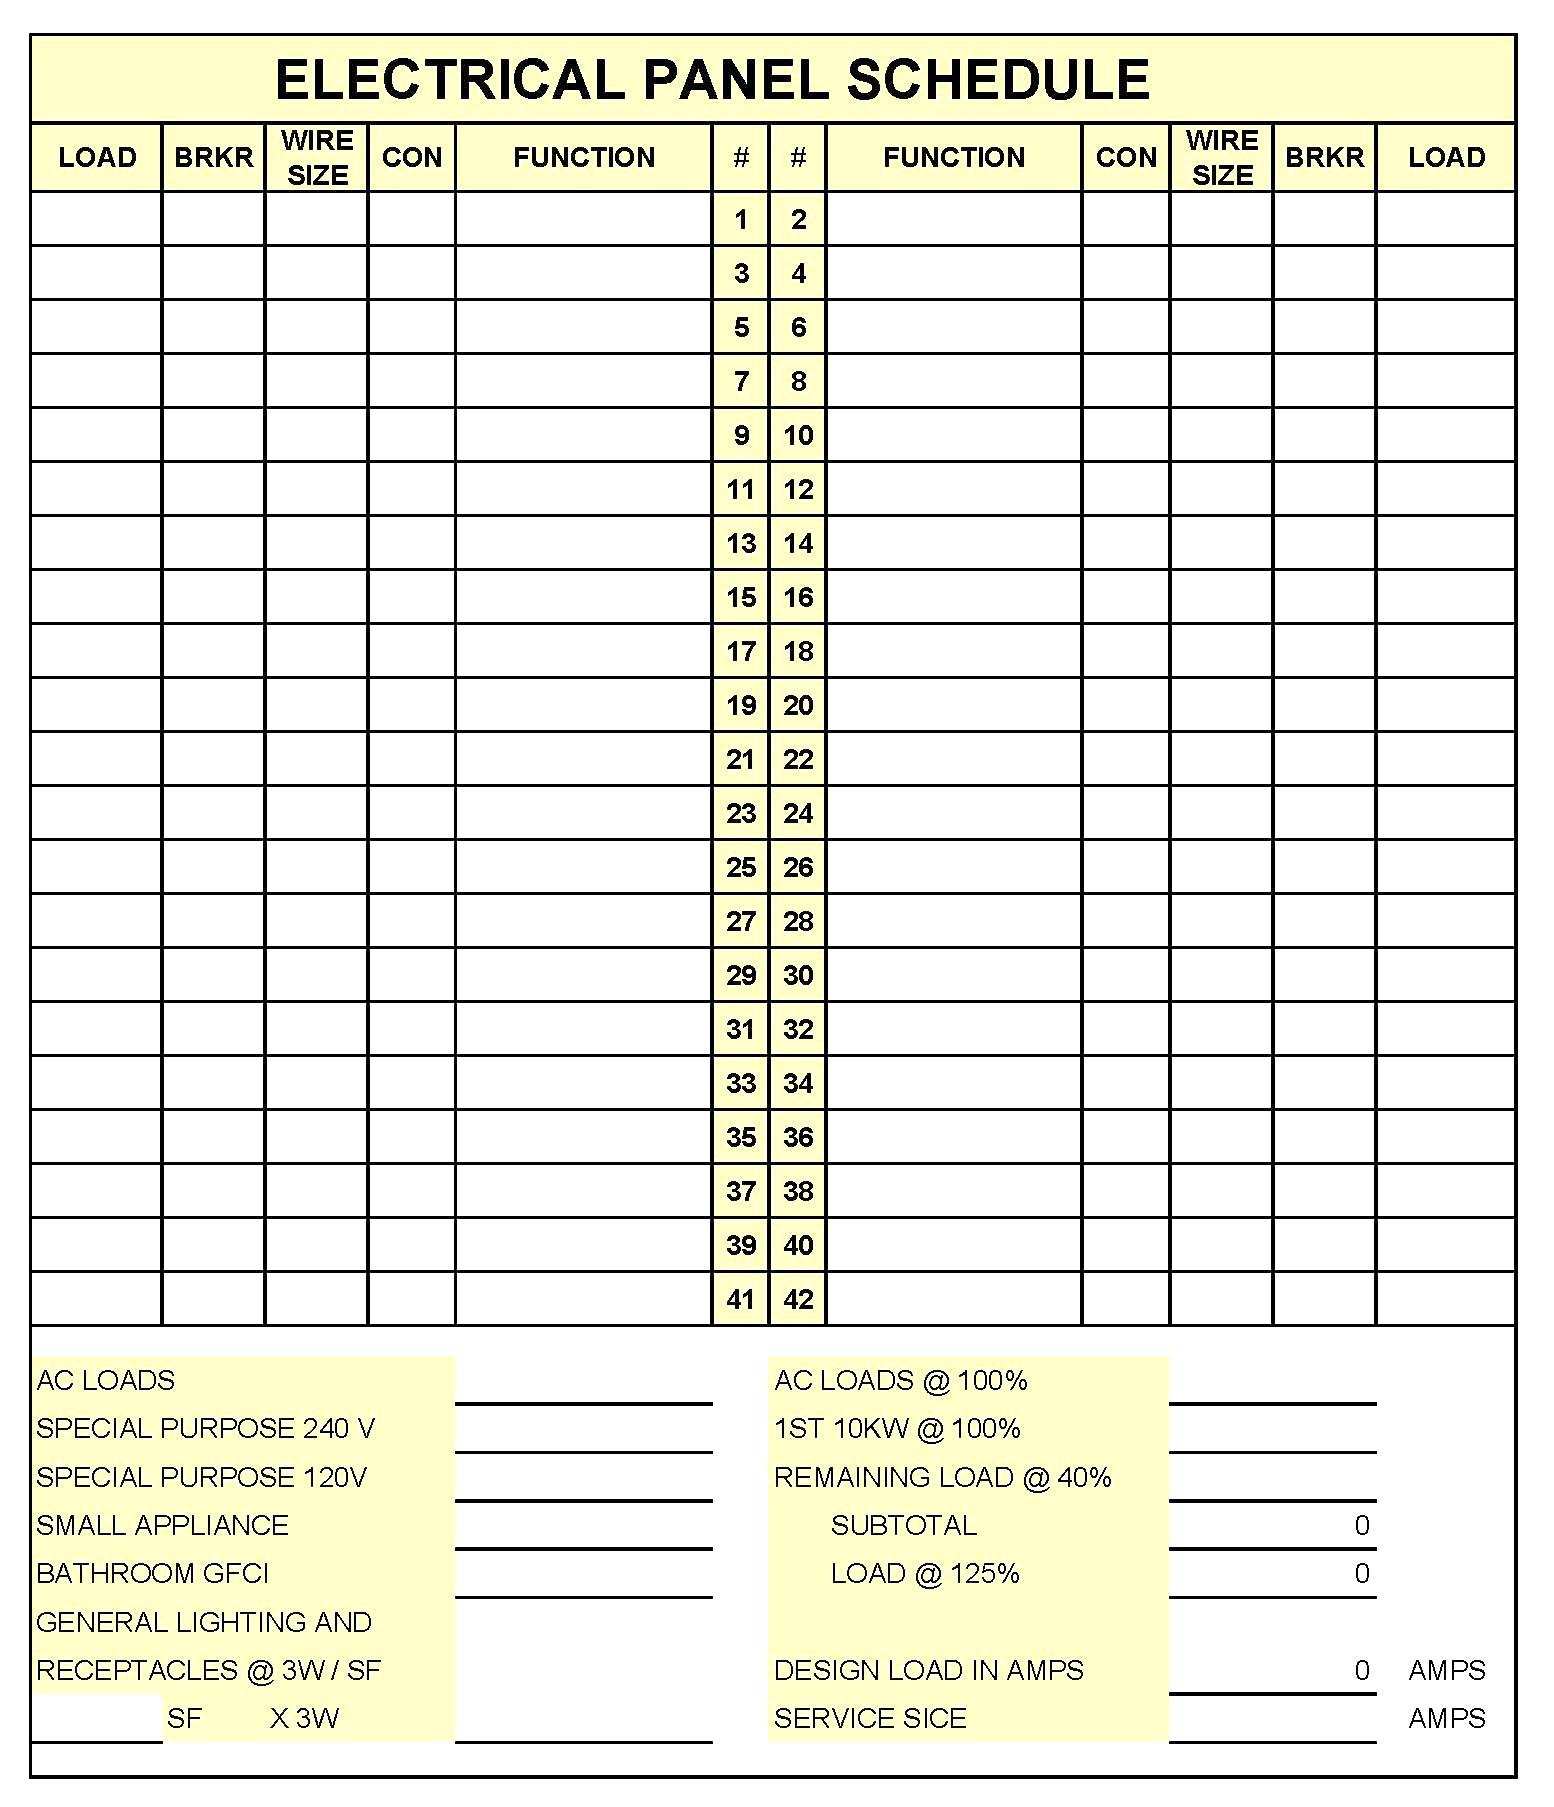 Documents Of Electrical Panel Schedule Template Excel To Electrical Panel Schedule Template Excel Samples